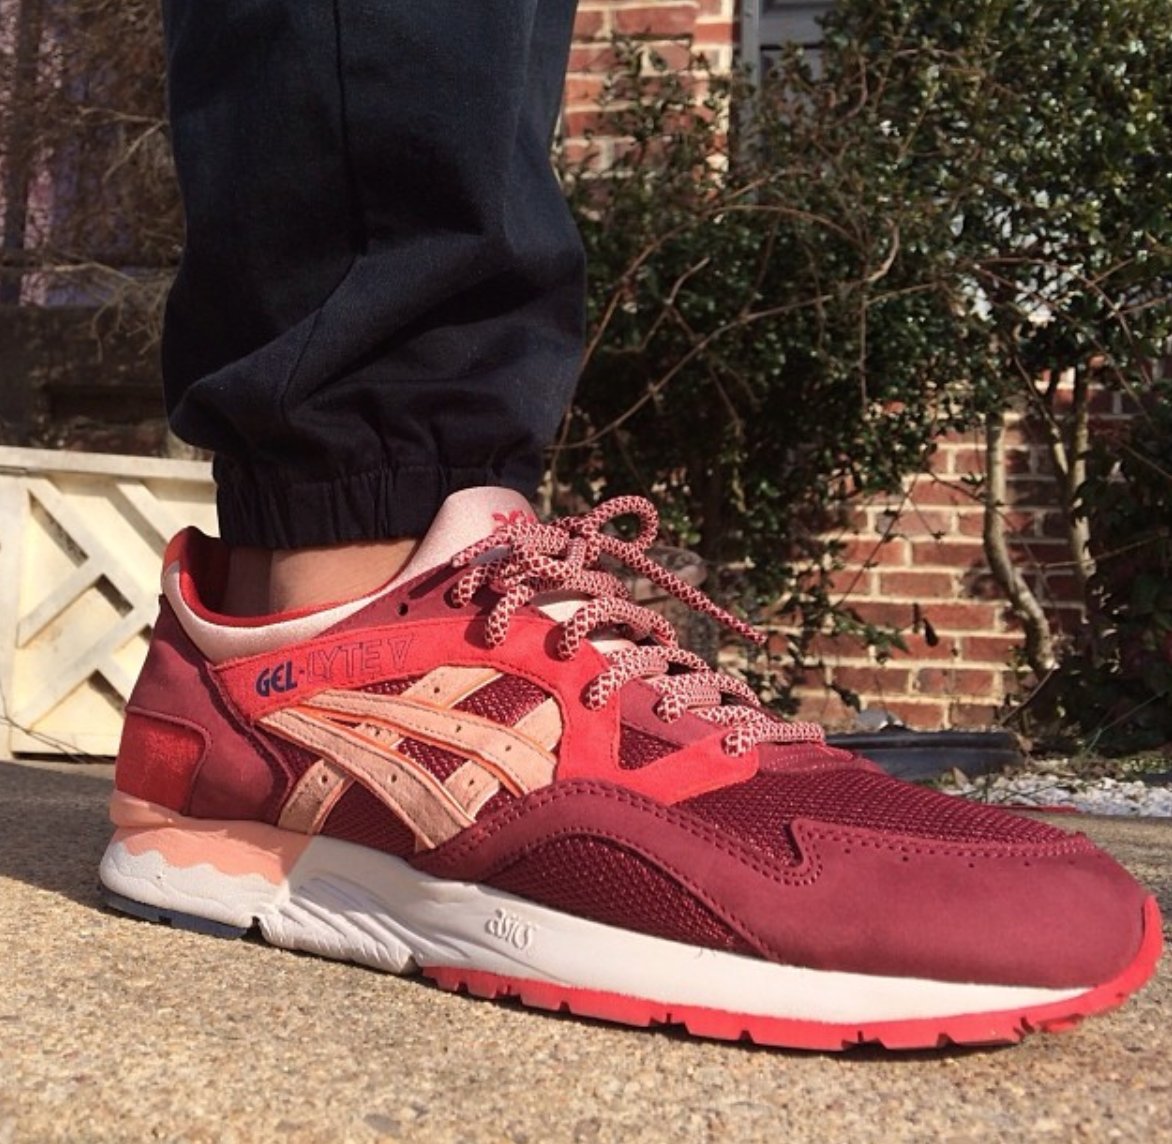 We're yall around in the era where we wore RF Asics? (yes that's my on foot picture, yes these were fire). Lovely memory, and impressive to see how far Ronnie Fieg has come with his products. Knew back then he was a special creator. Always delivering something different